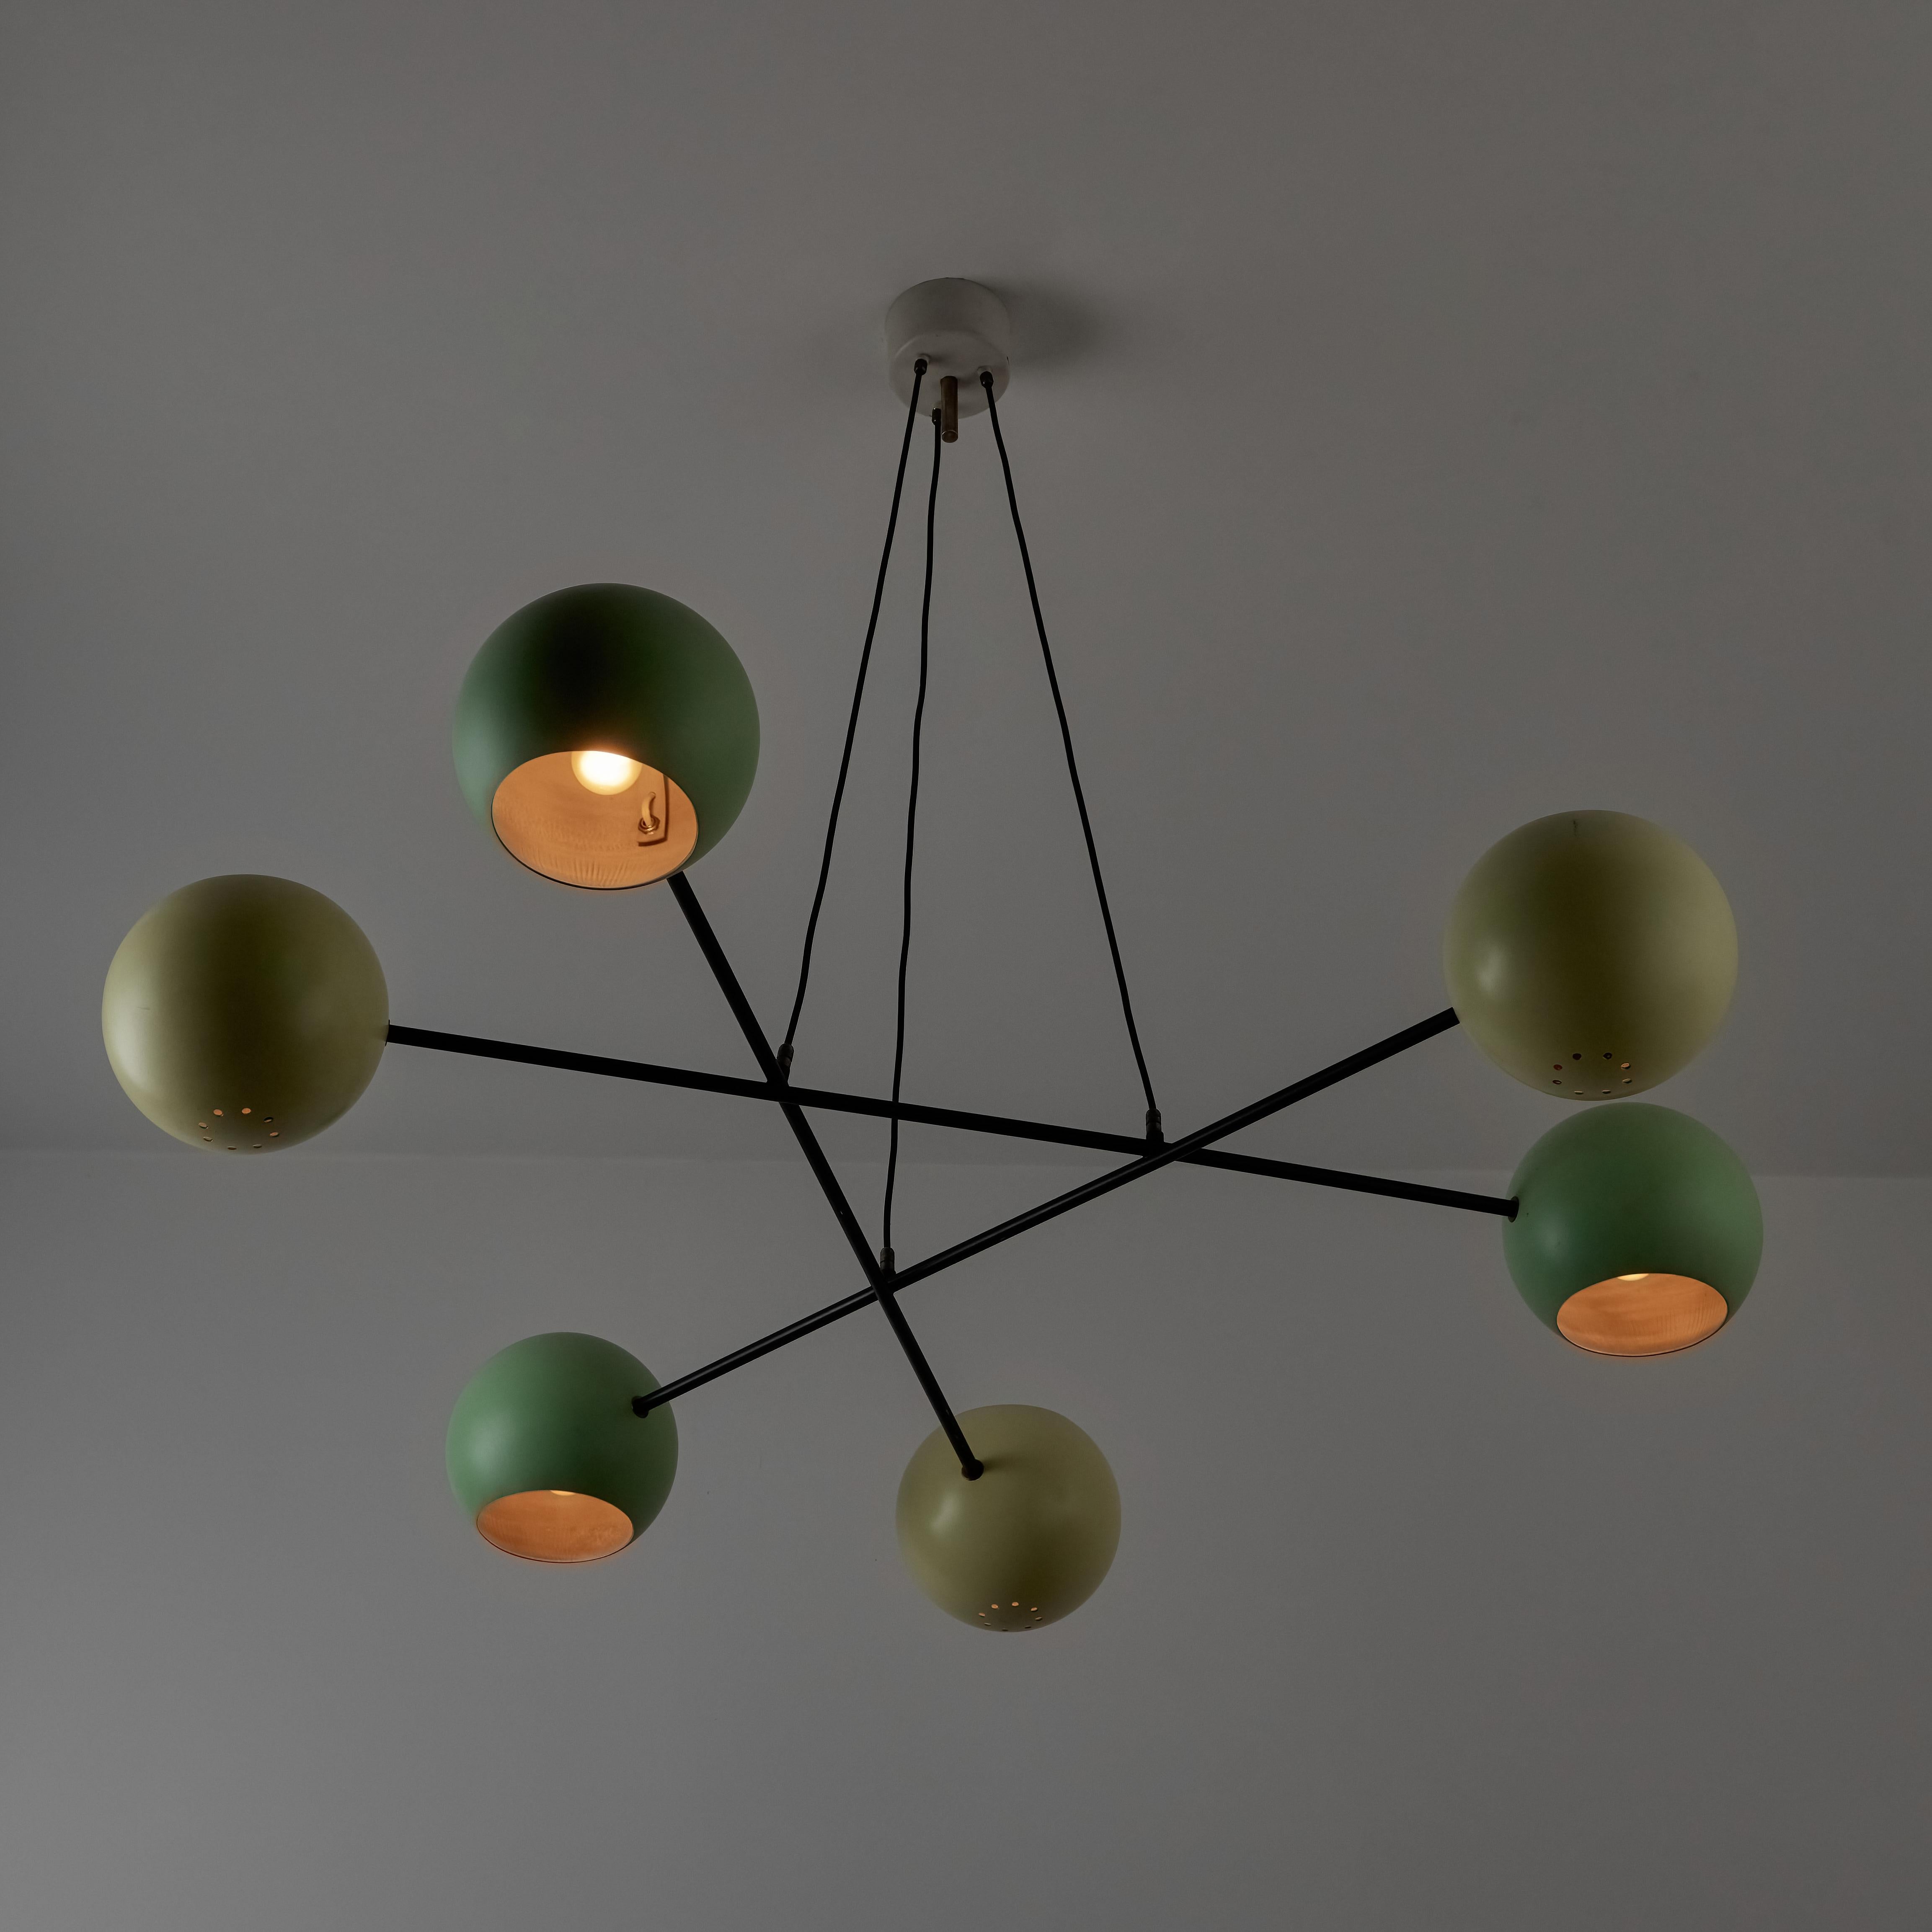 Suspension light by Stilnovo. Designed and manufactured in Italy, circa the 1950s. A mobile suspension chandelier with a playful color way. The two-toned shades are in a sequence order, consisting of dark teal and a muted light green. The shades are